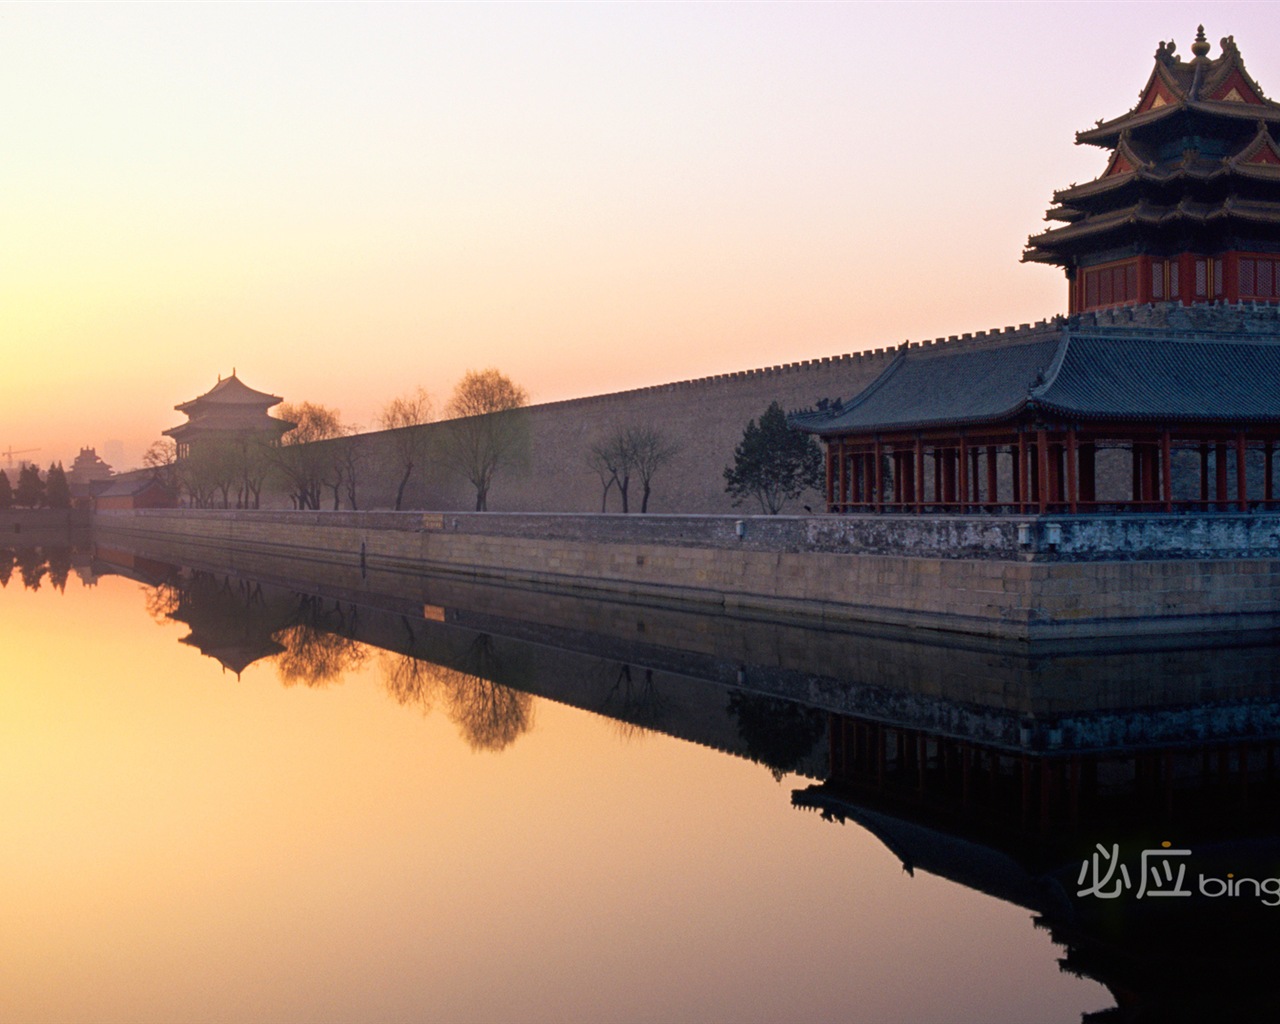 Bing selection best HD wallpapers: China theme wallpaper (2) #5 - 1280x1024